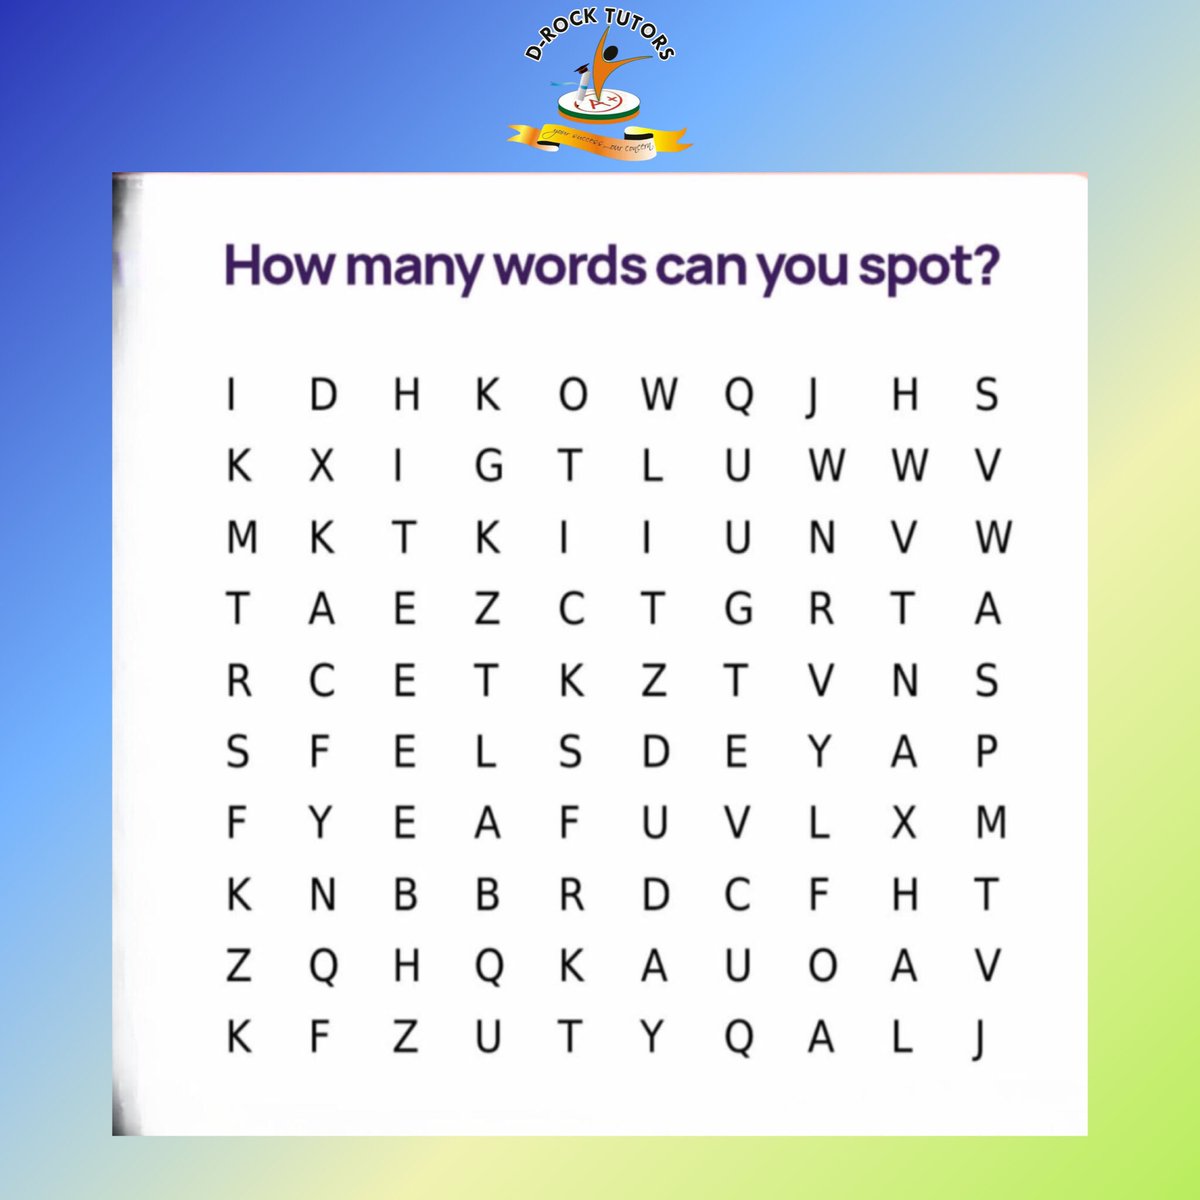 Let's take a quick test💥

How many words can you pick out from the word puzzle?
Kindly let us know in the comments.

#derocktutors #learningmadeeasy